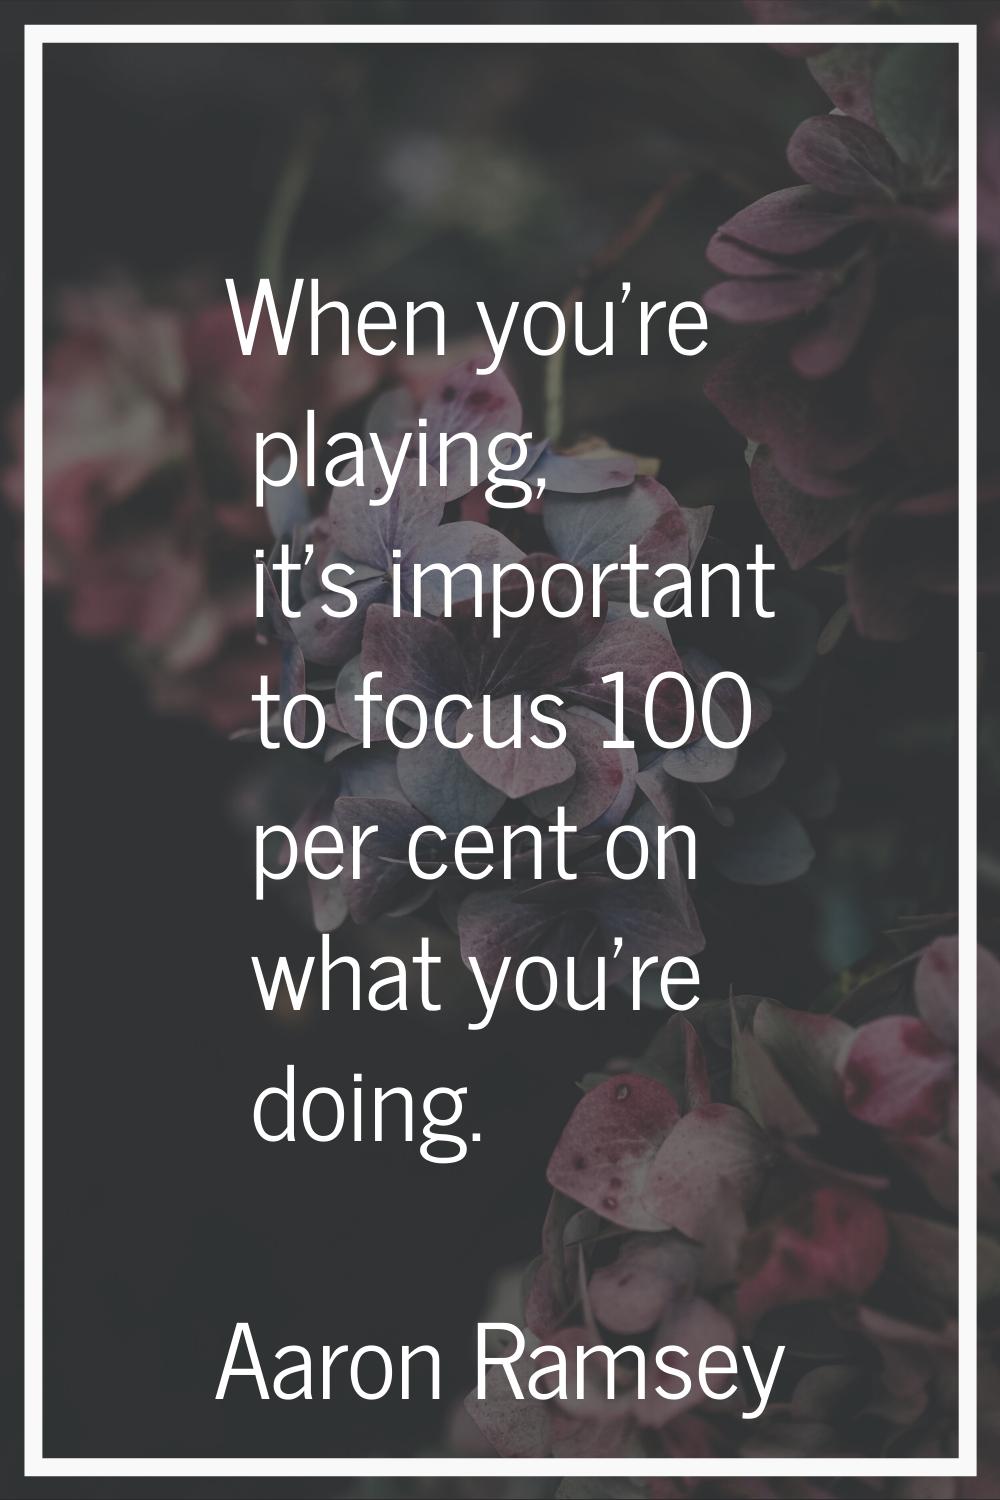 When you're playing, it's important to focus 100 per cent on what you're doing.